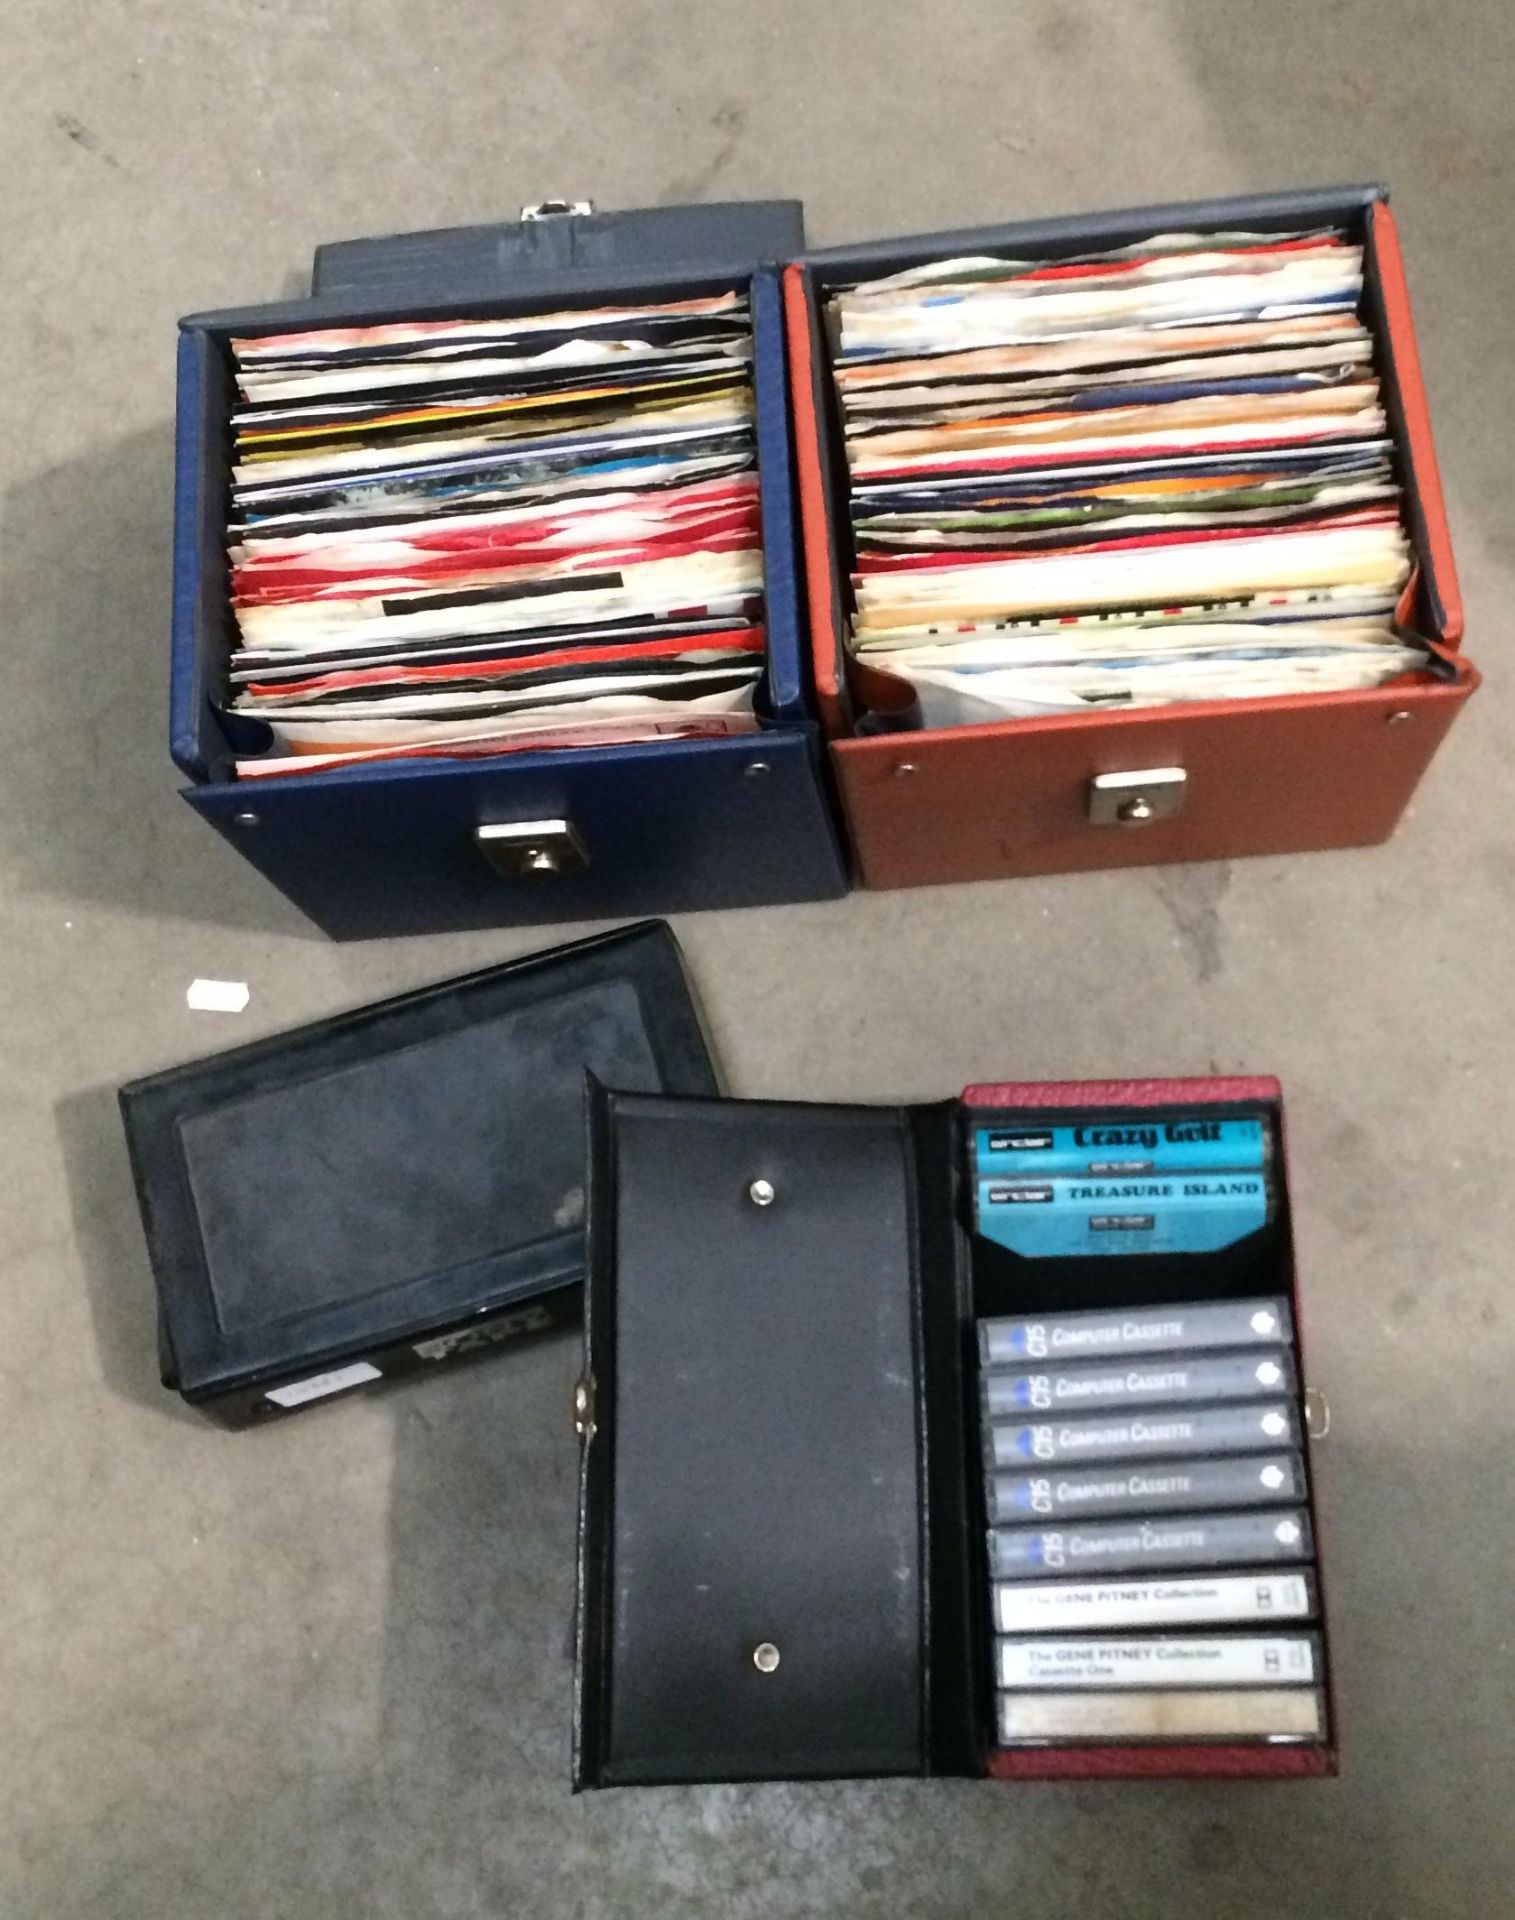 Contents to brown and blue vinyl singles cases - approximately 145 assorted 45rpm singles including